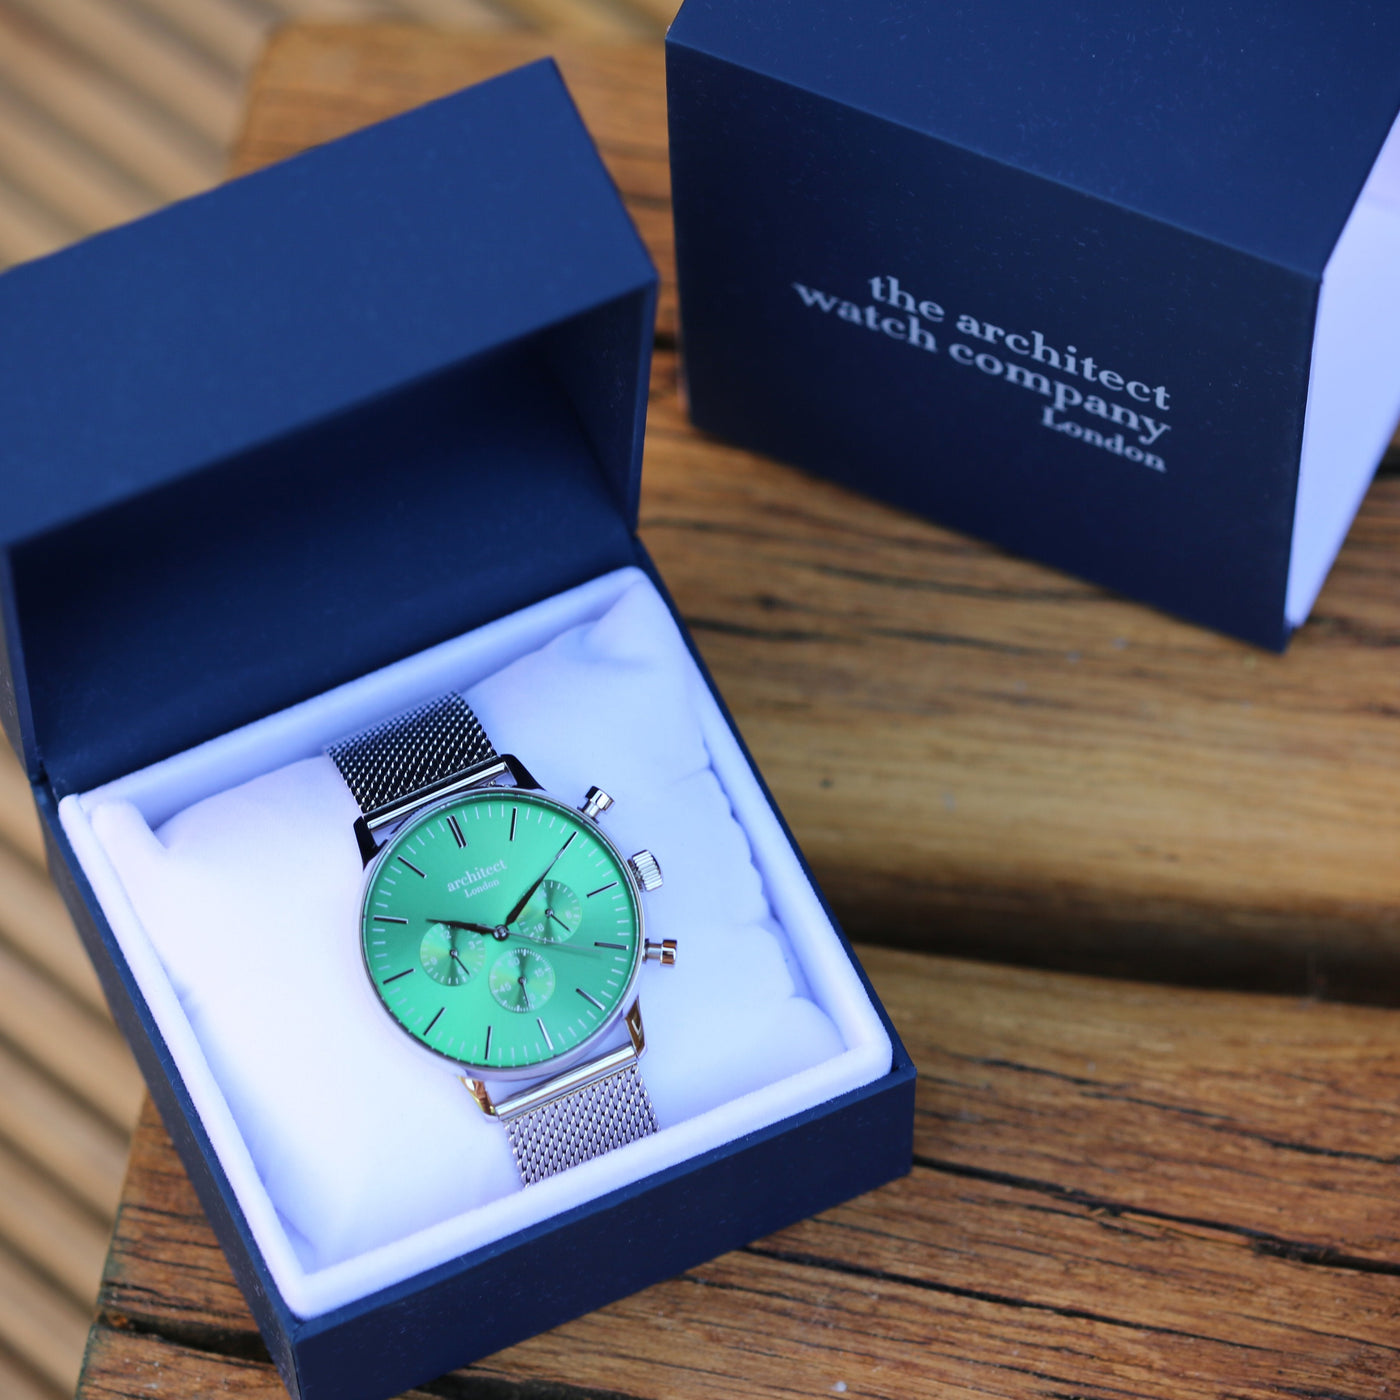 Mens Architect Motivator Watch In Envy Green With Silver Mesh Strap - Modern Font Engraving